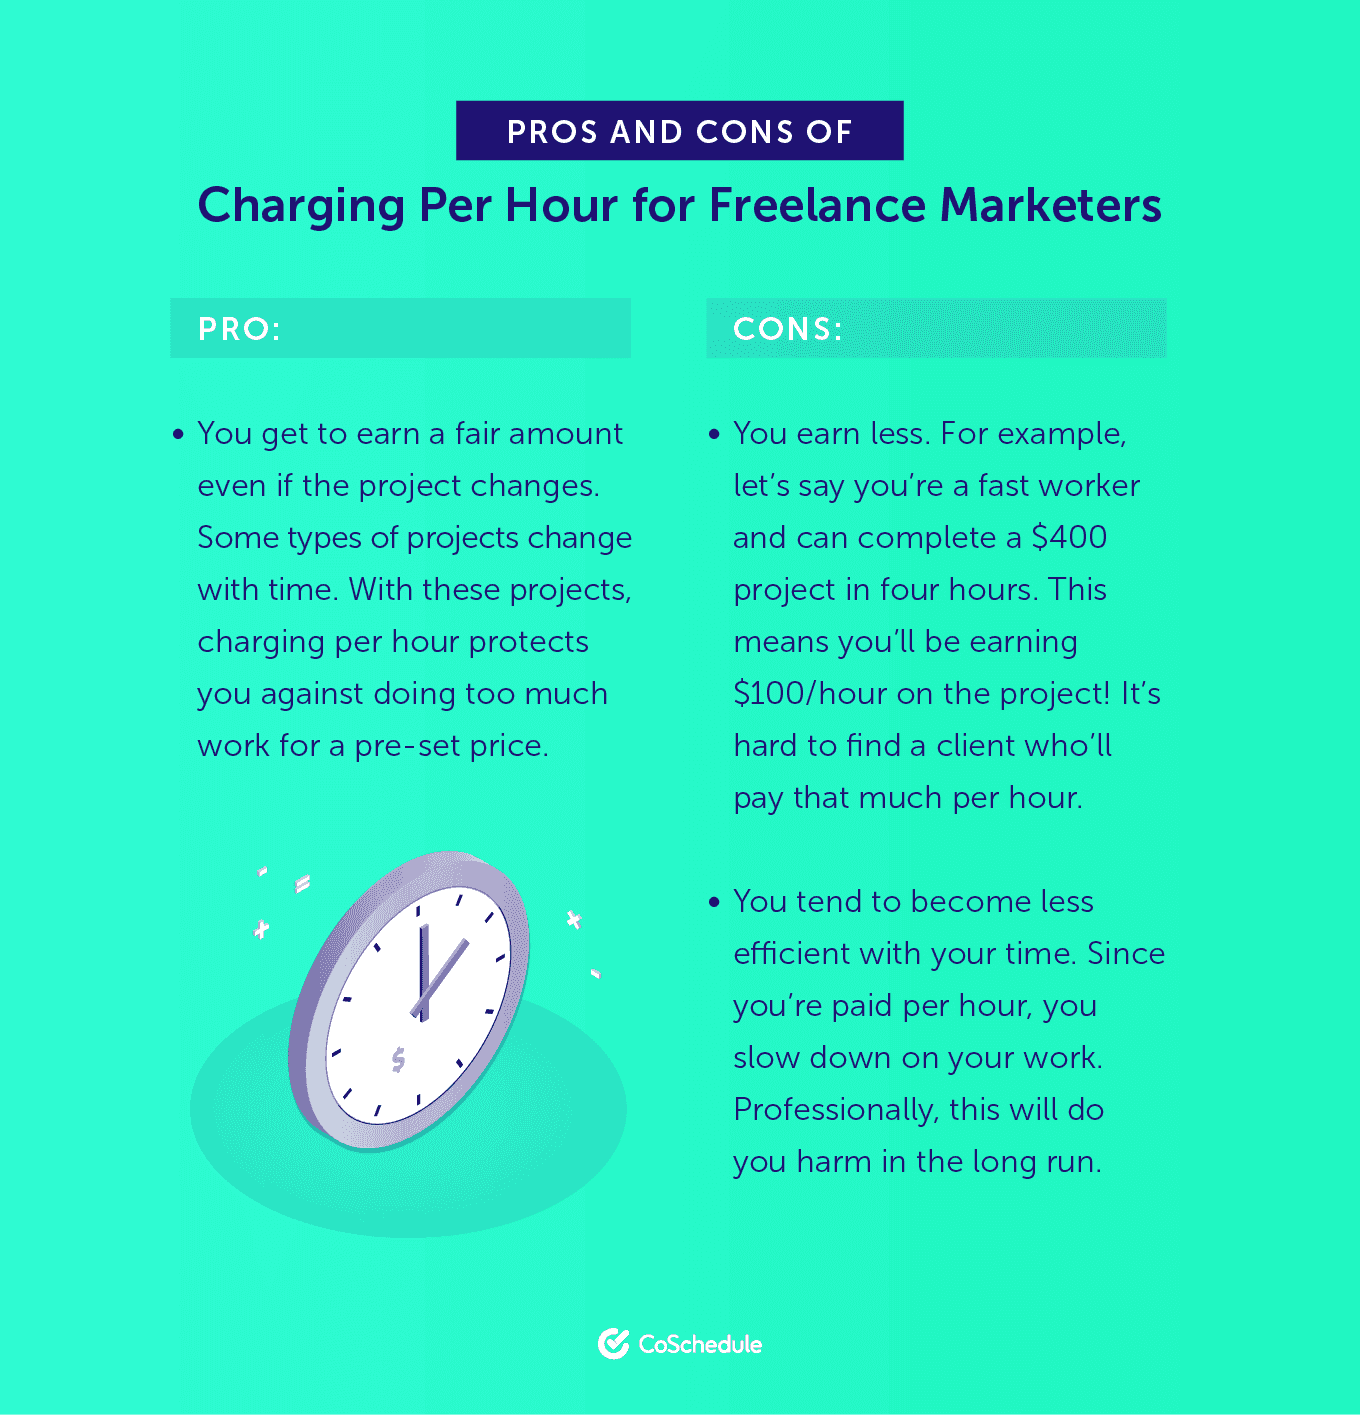 Pros and Cons of Charging Per Hour for Freelance Marketers